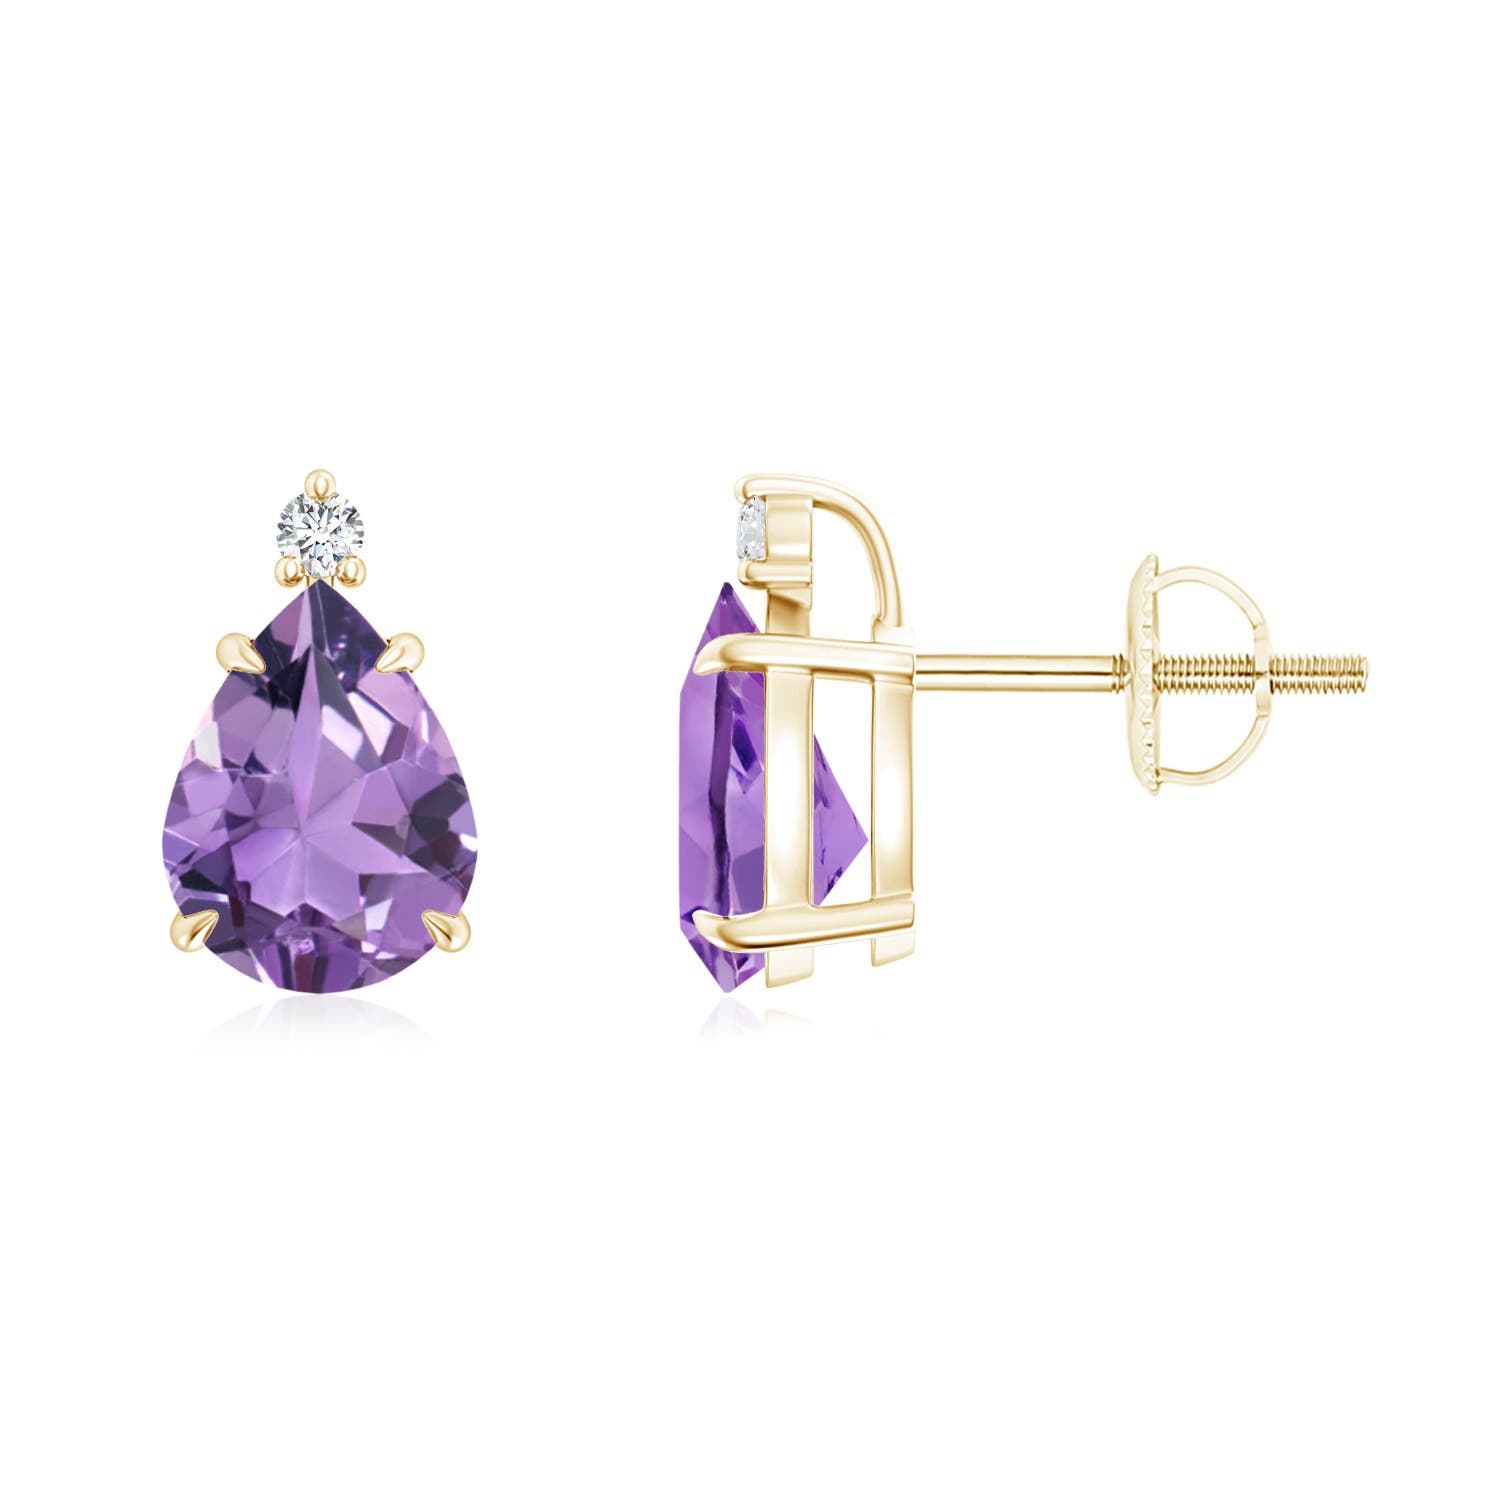 A - Amethyst / 2.04 CT / 14 KT Yellow Gold